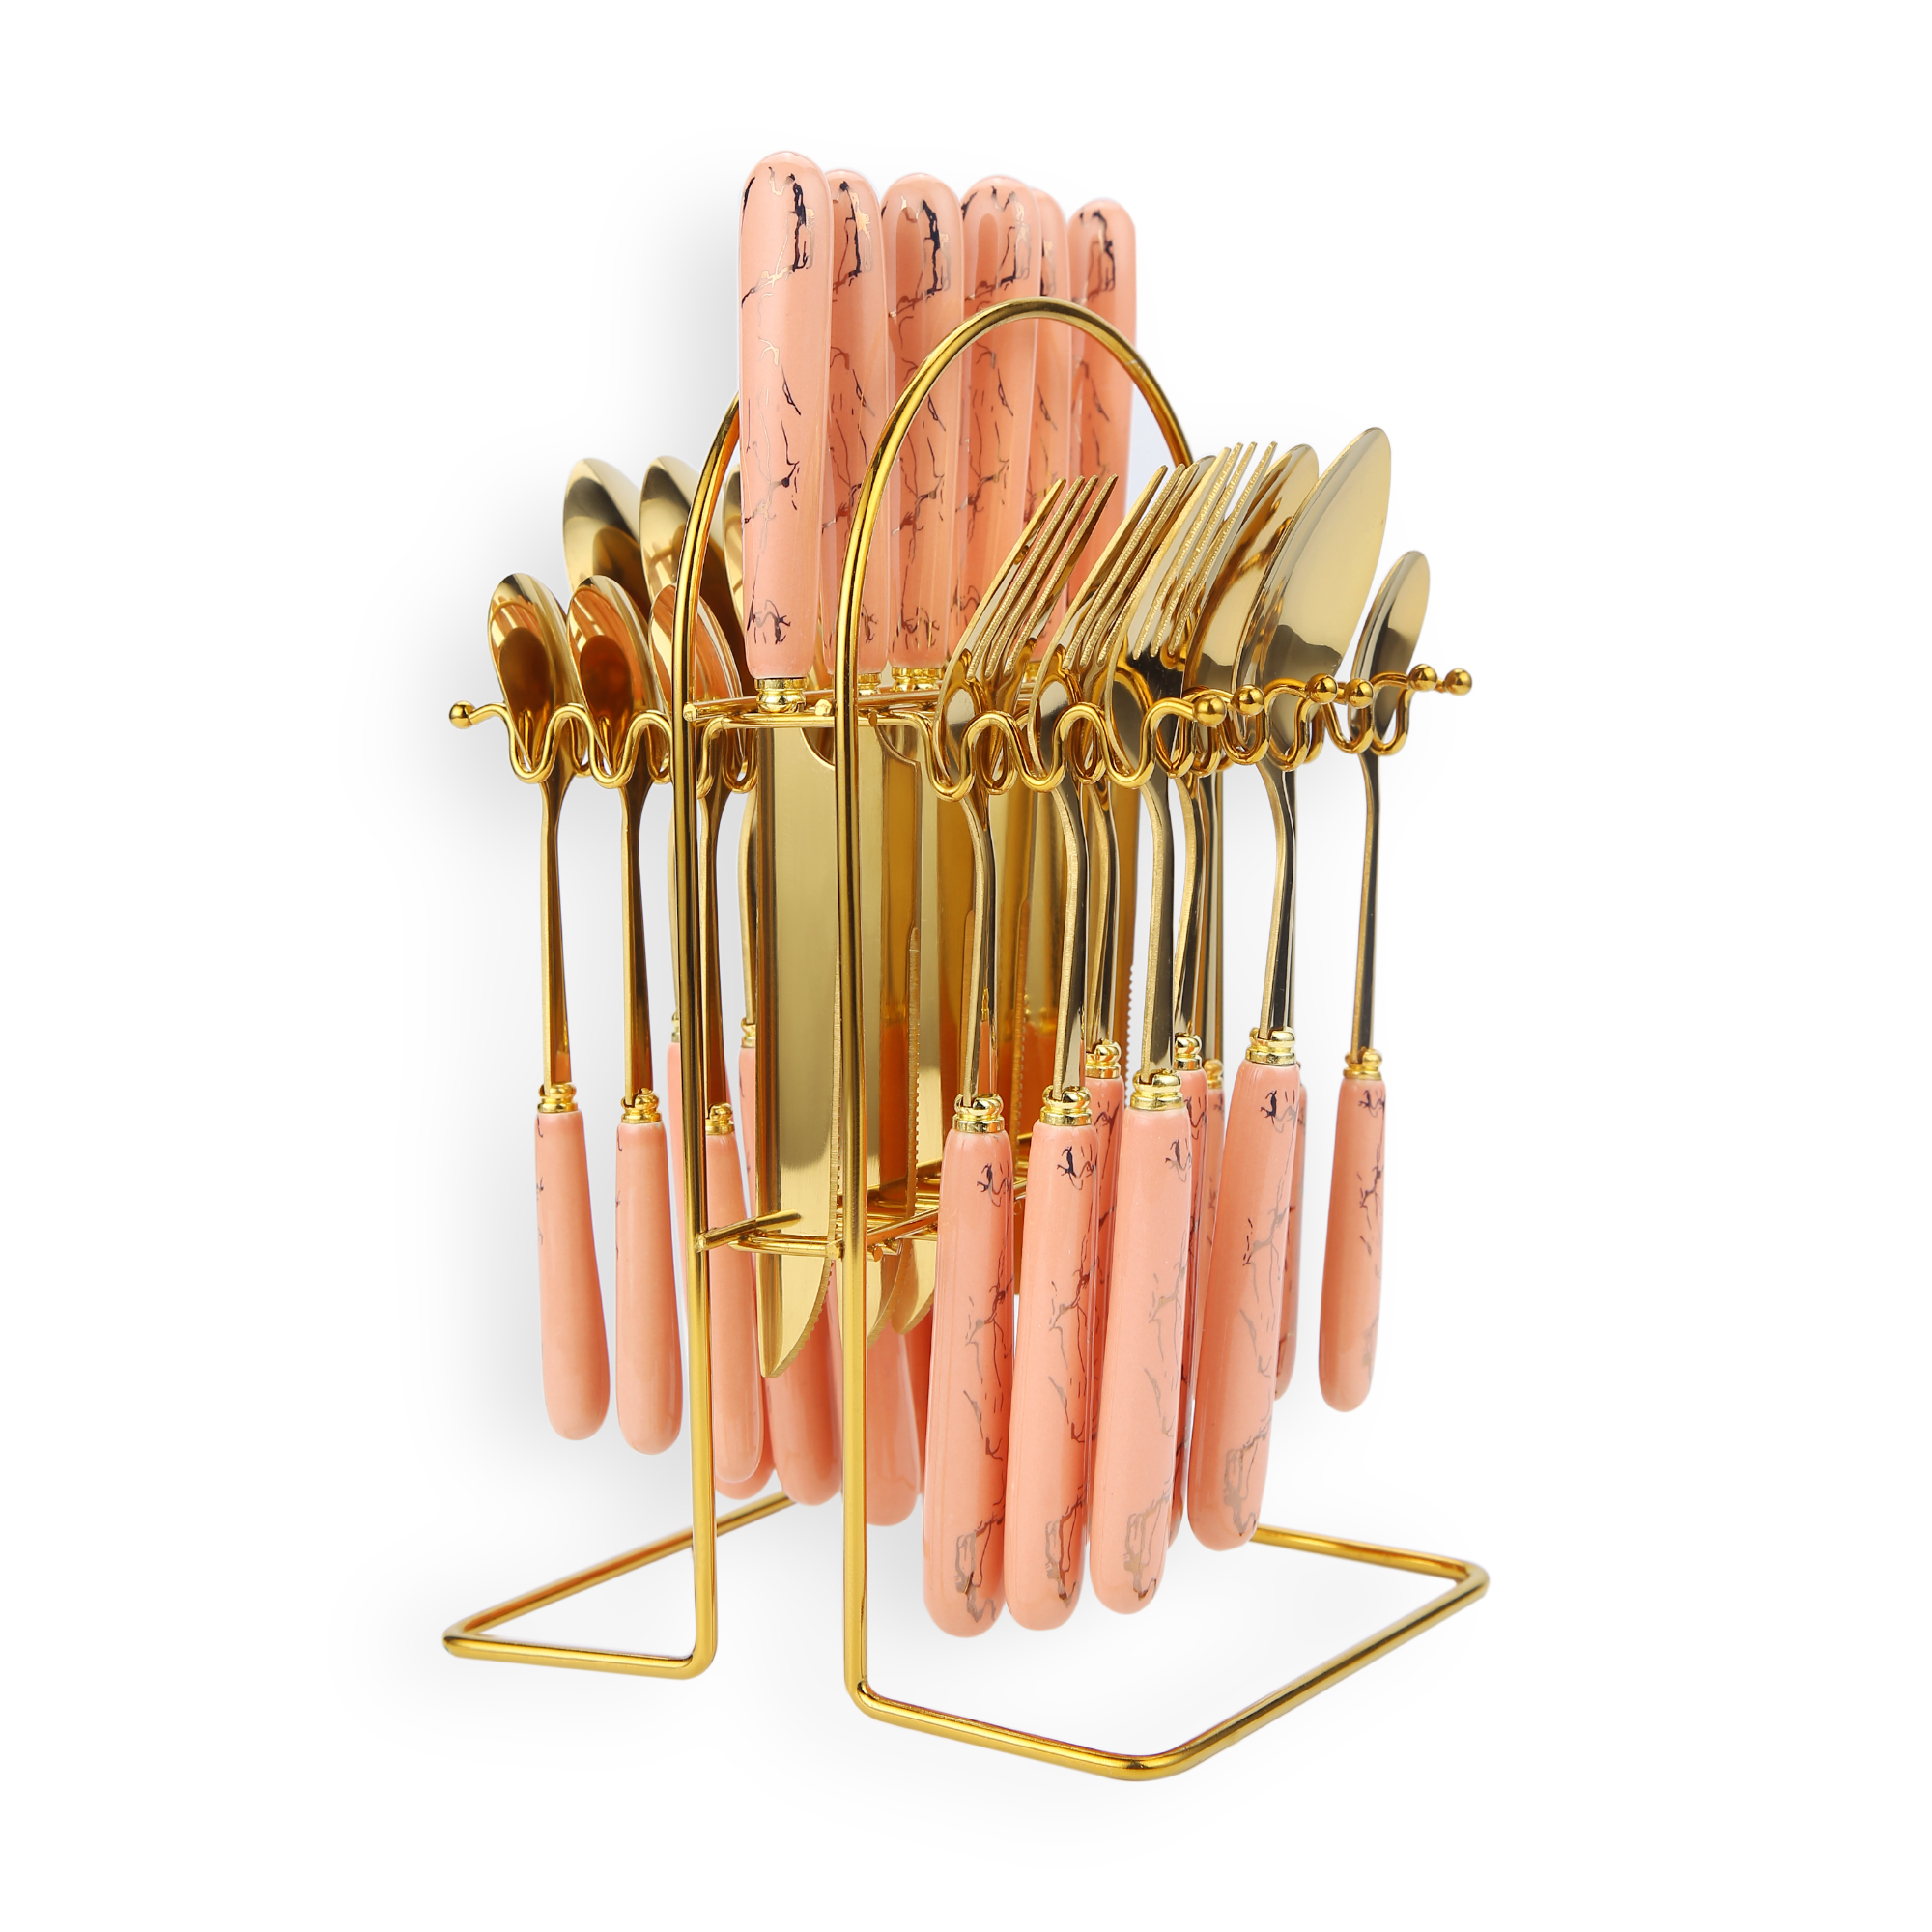 24-Piece Stainless Steel Cutlery Set With Stand Gold/Pink